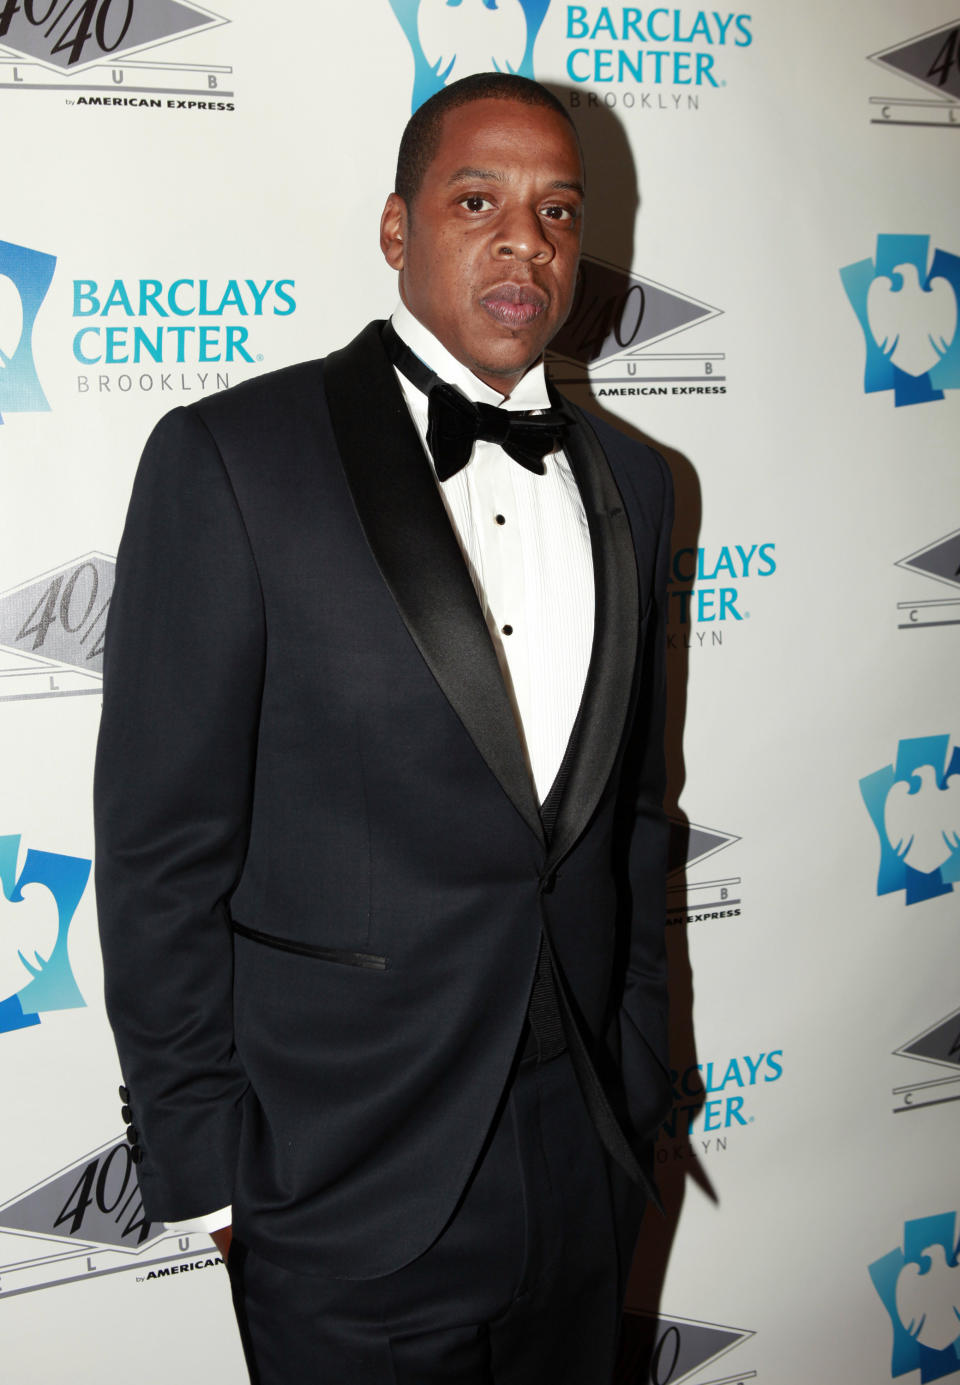 NEW YORK, NY - SEPTEMBER 27:  Jay-Z attends the grand opening of the 40/40 Club at Barclays Center on September 27, 2012 in the Brooklyn borough of New York City.  (Photo by Allison Joyce/Getty Images)